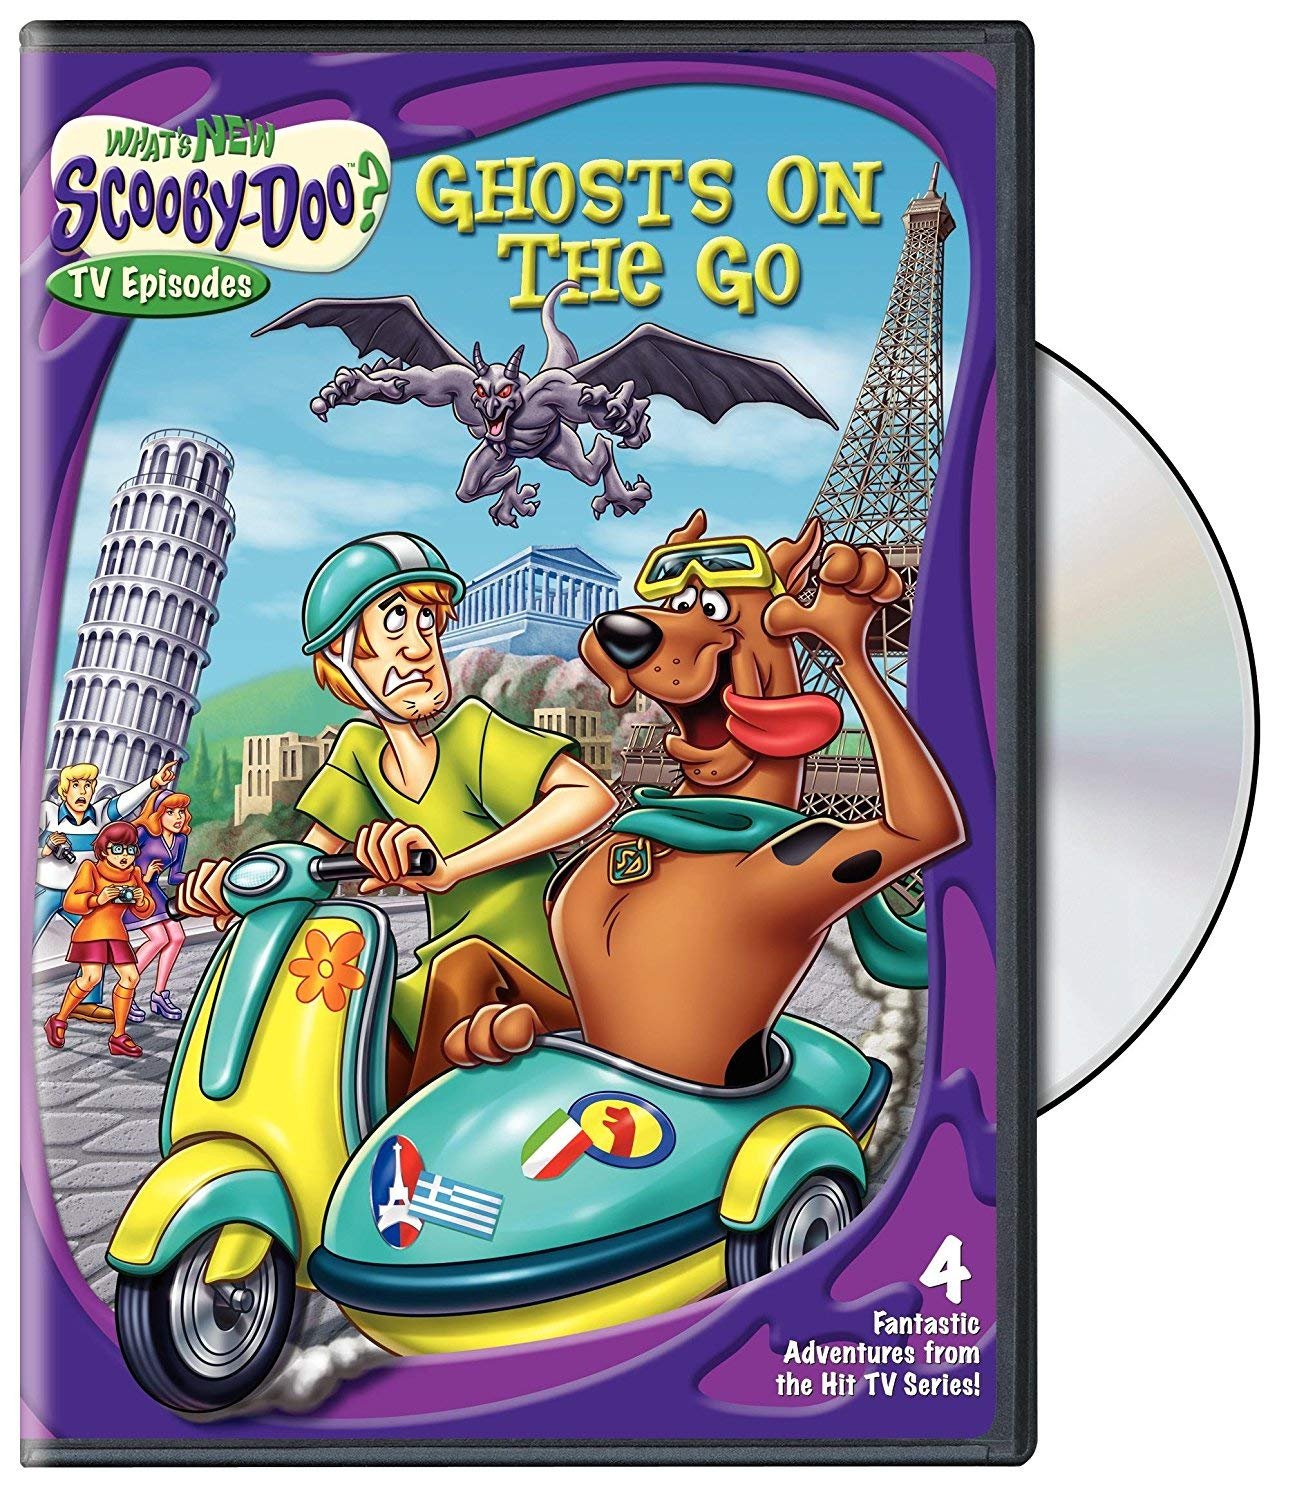 What's New ScoobyDoo? Vol. 7 Ghosts on the Go (Repackage) (DVD) dv004